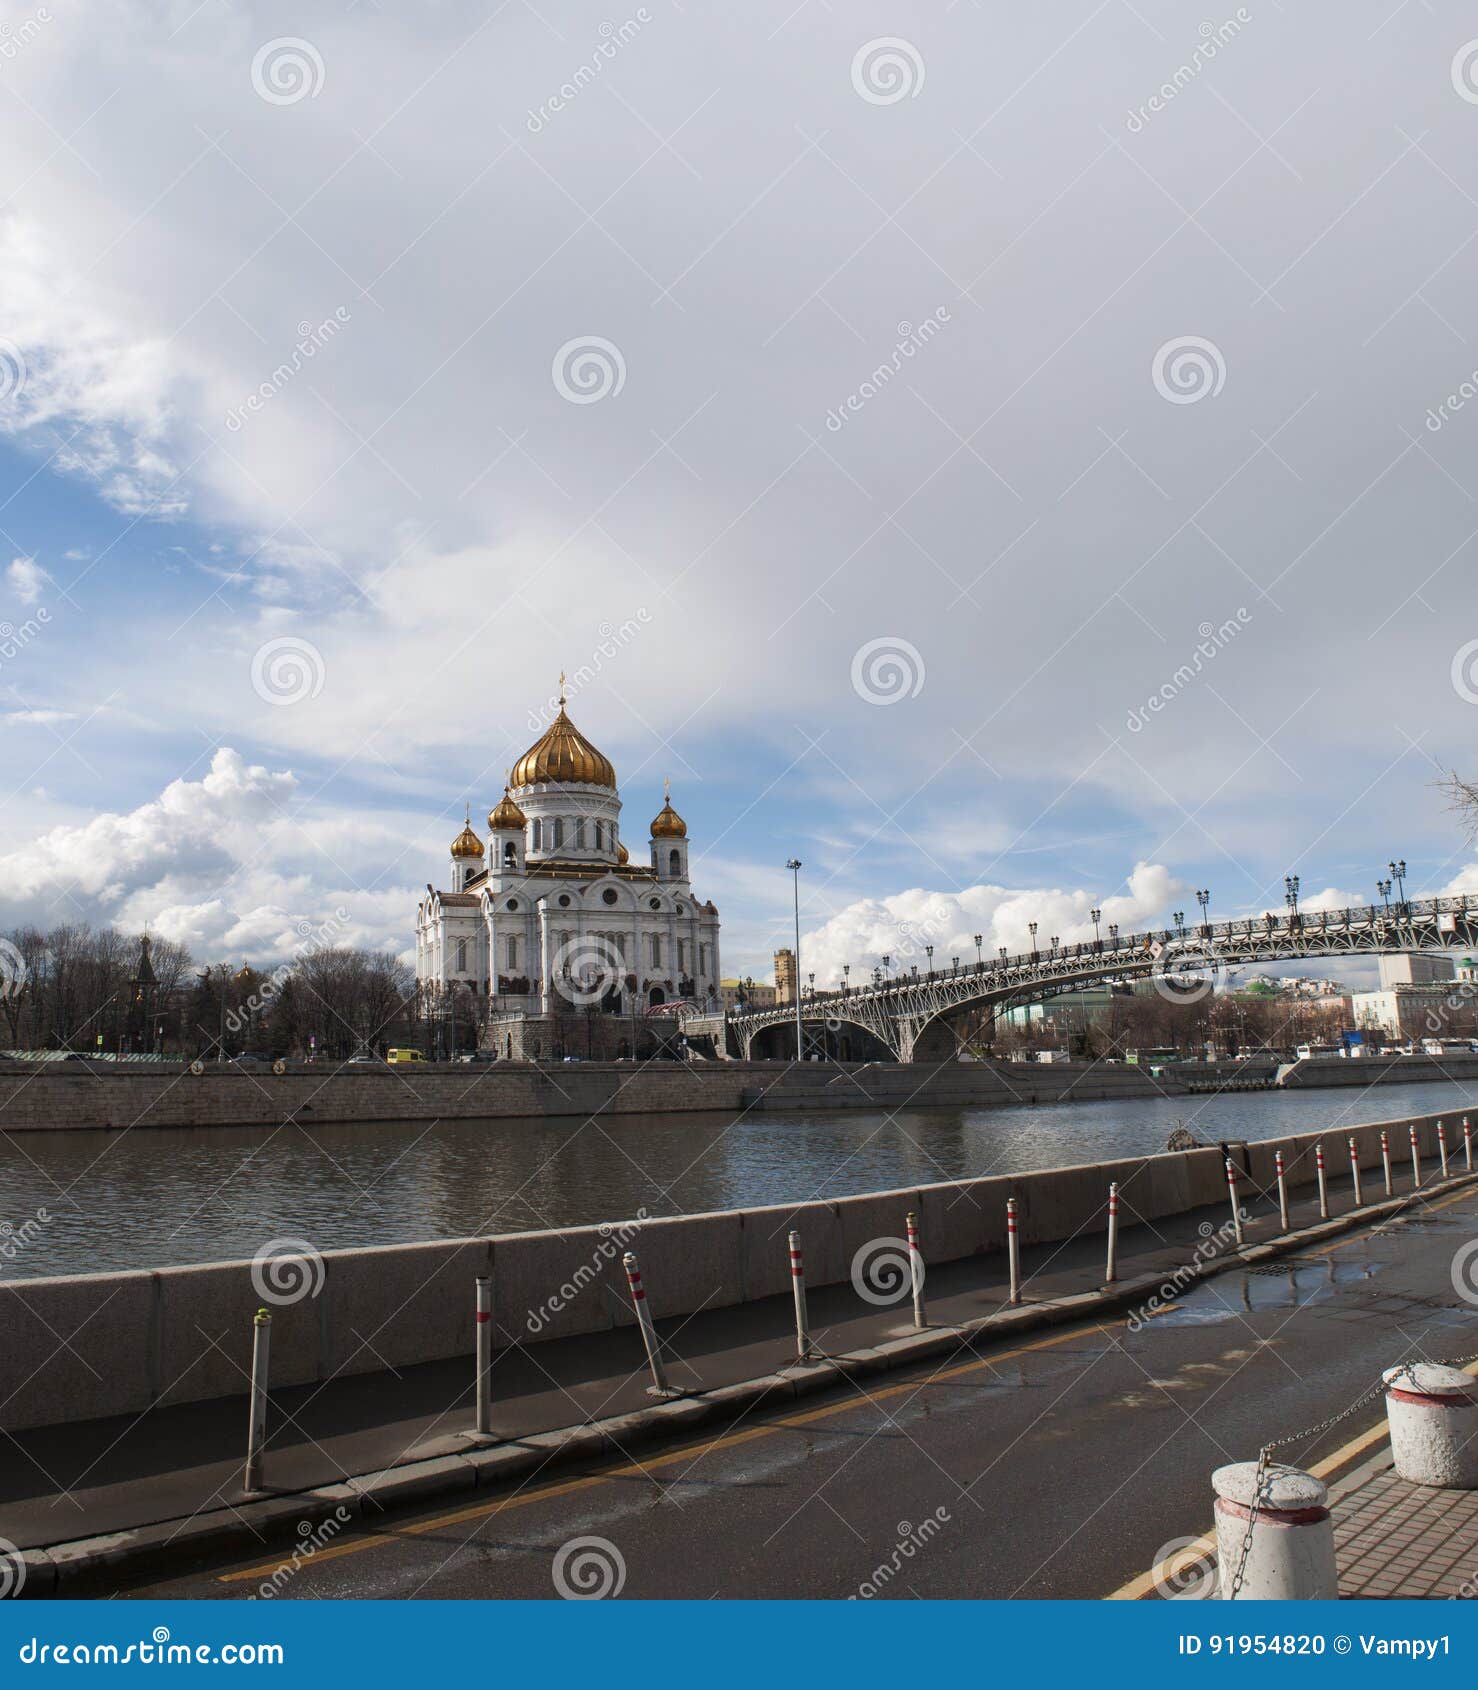 Collection 91+ Images what city does the moskva river flow through Excellent